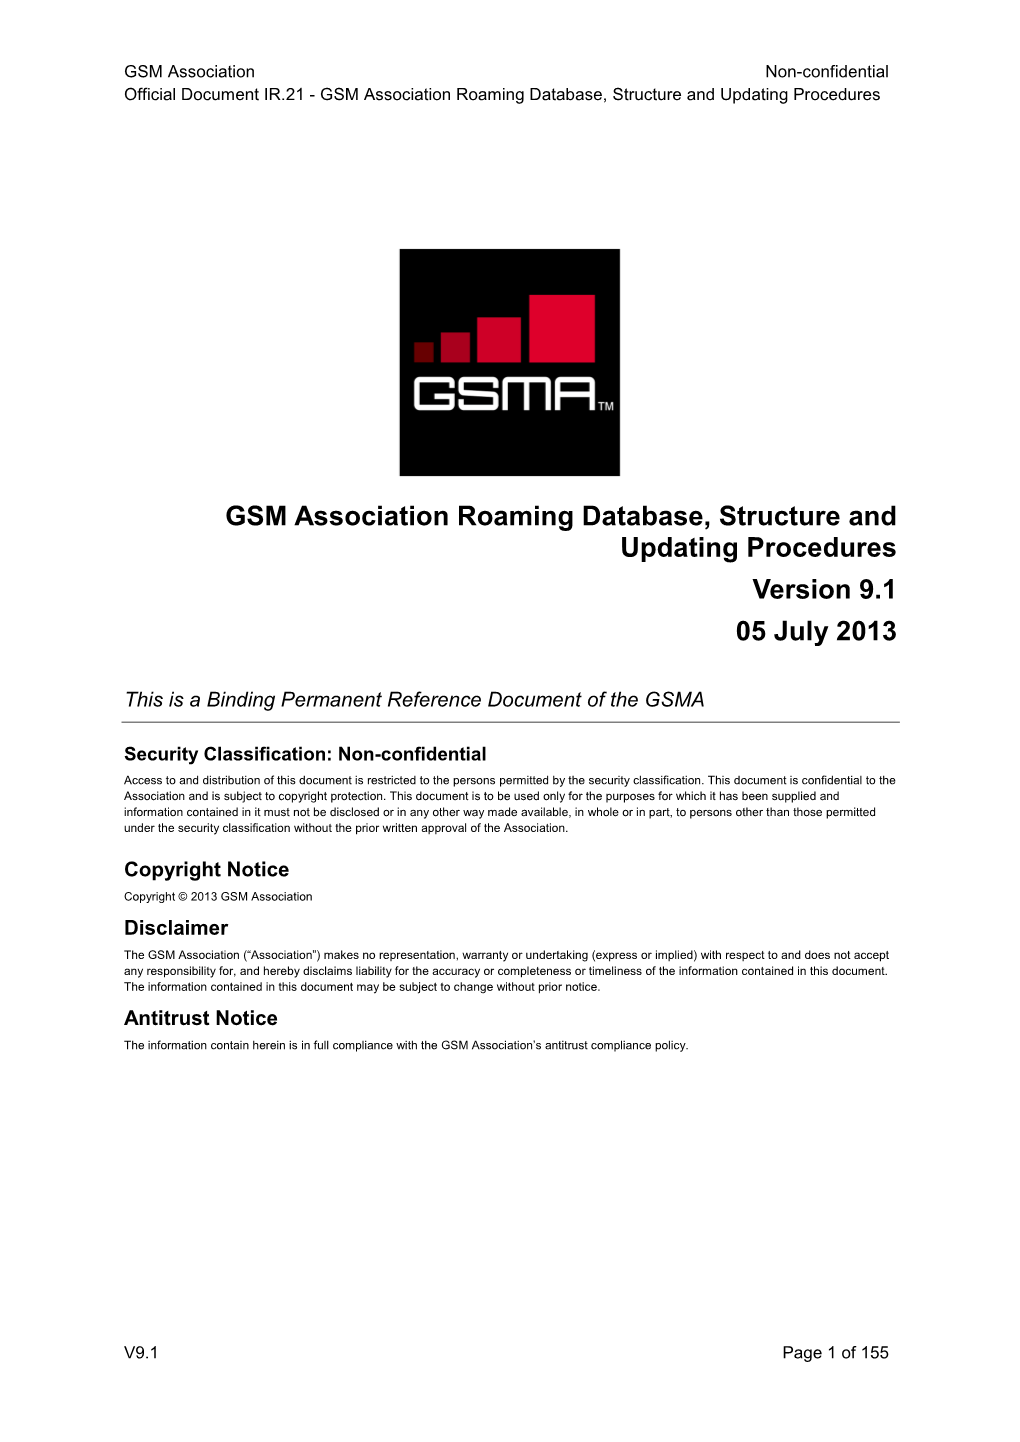 GSM Association Roaming Database, Structure and Updating Procedures